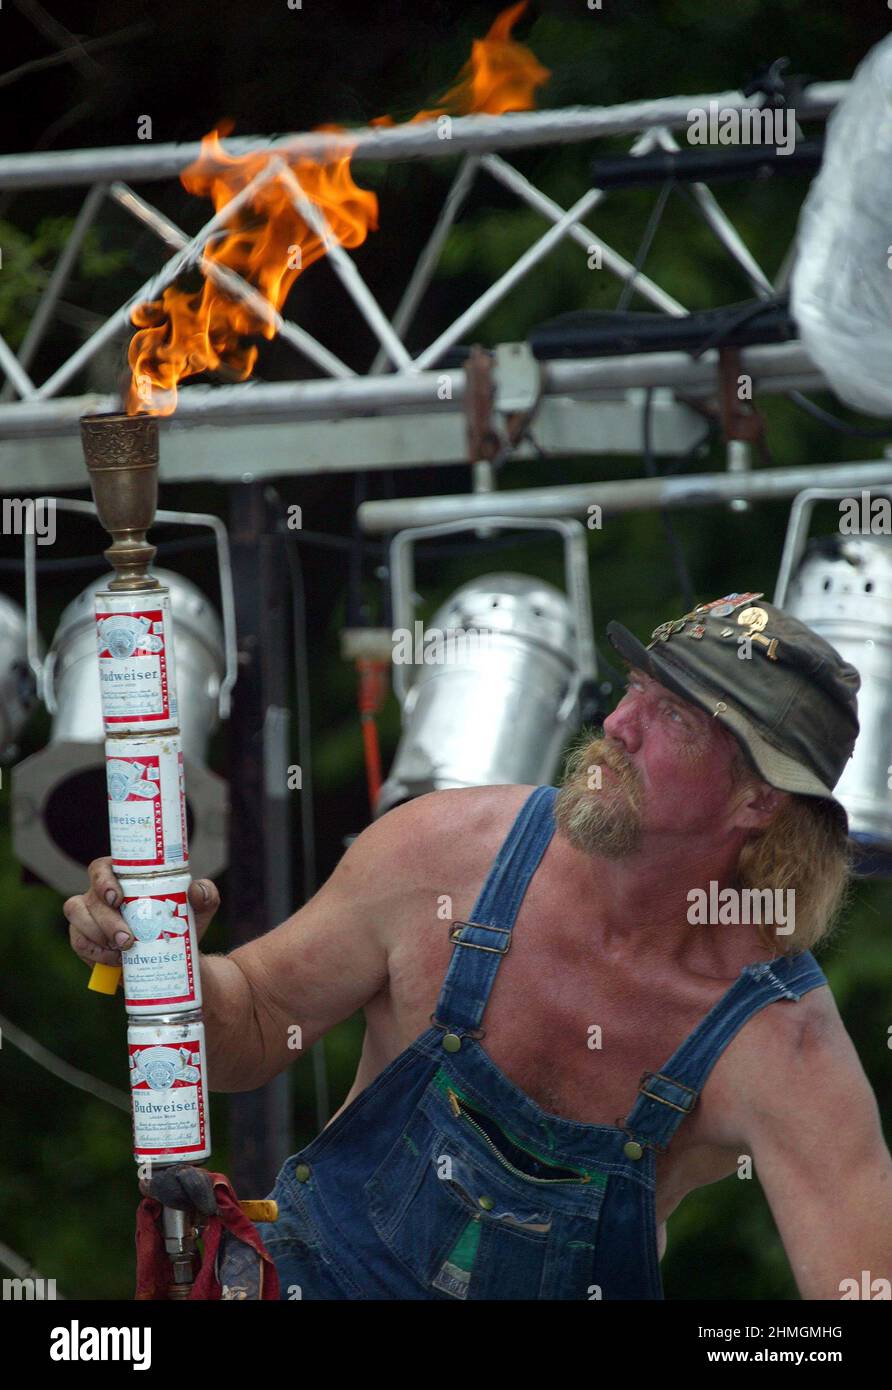 REDNECK 'ELBOW' WITH A BLOW TOURCH MADE FROM BUDWEISER BEER CANS AT THE REDNECK GAMES EAST DUBLIN GEORGIA USA. THE GAMES WERE  STARTED IN 1996 AS A RIVAL TO THE OLYMPIC GAMES HELD IN ATLANTA AND FEATURE AN UNUSUAL RANGE OF SPORTS FROM DUCKING TO PIGS FEET TO BELLY FLOPPING IN TO A MUD PIT. THE GAMES IN THERE TENTH YEAR NOW DRAW UP TO 10,000 REDNECKS FROM THE HEART OF REDNECK LAND GEORGIA STATE. PICTURES: GARYROBERTSPHOTO.COM Stock Photo